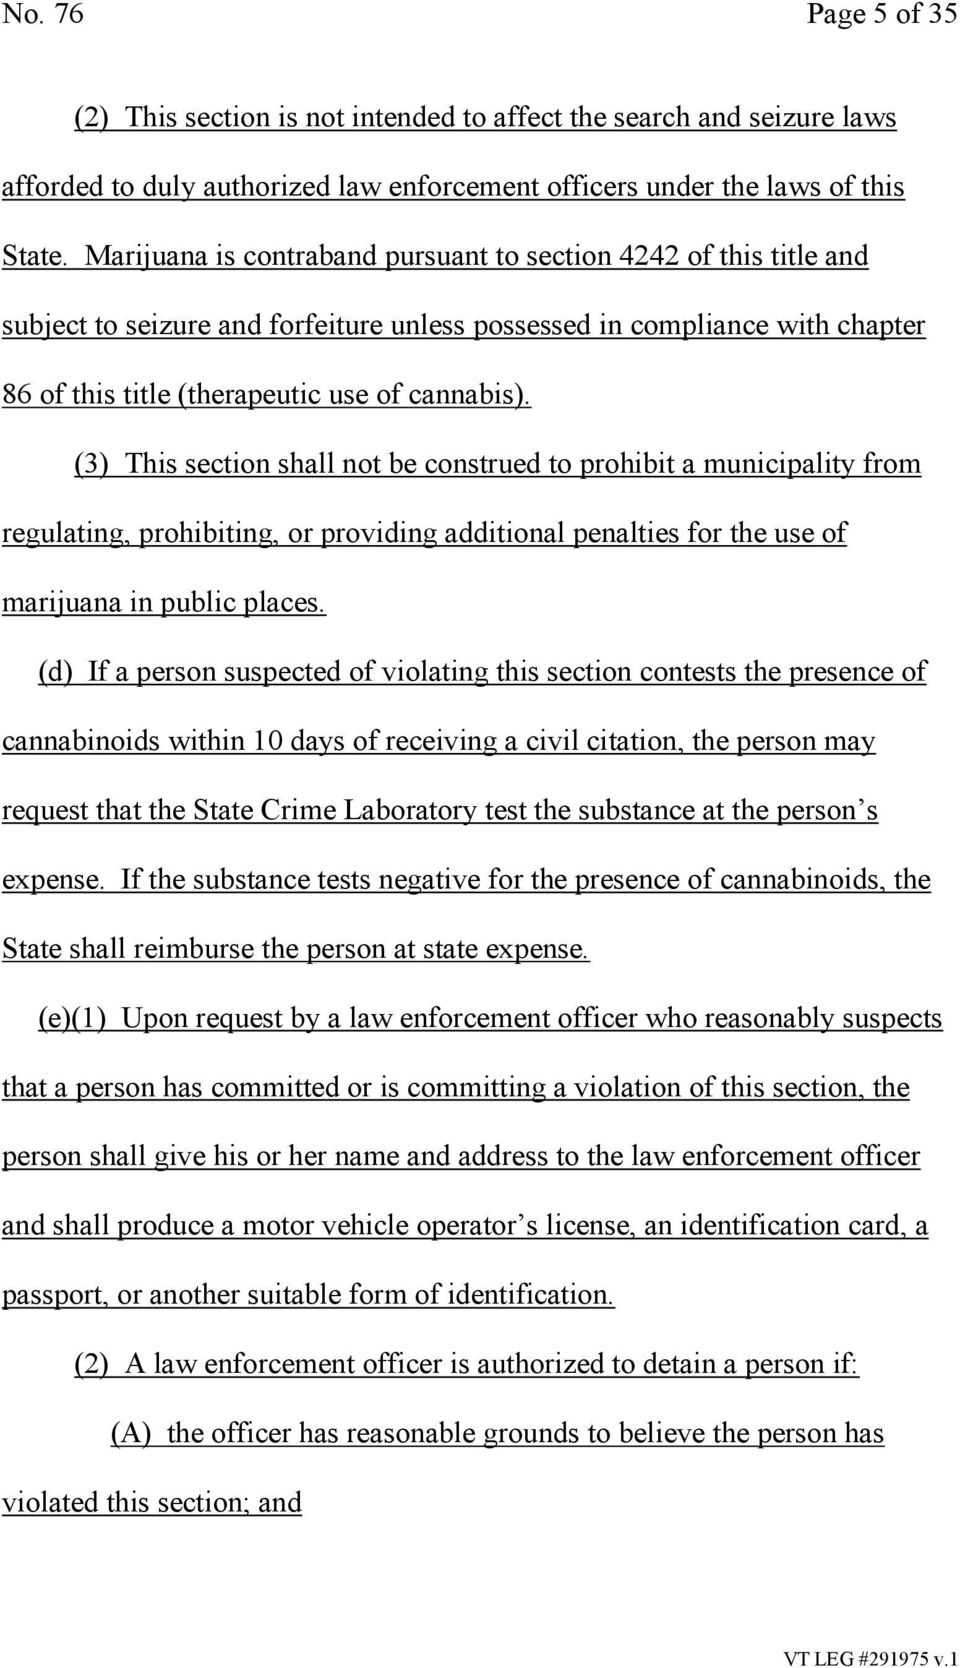 (3) This section shall not be construed to prohibit a municipality from regulating, prohibiting, or providing additional penalties for the use of marijuana in public places.